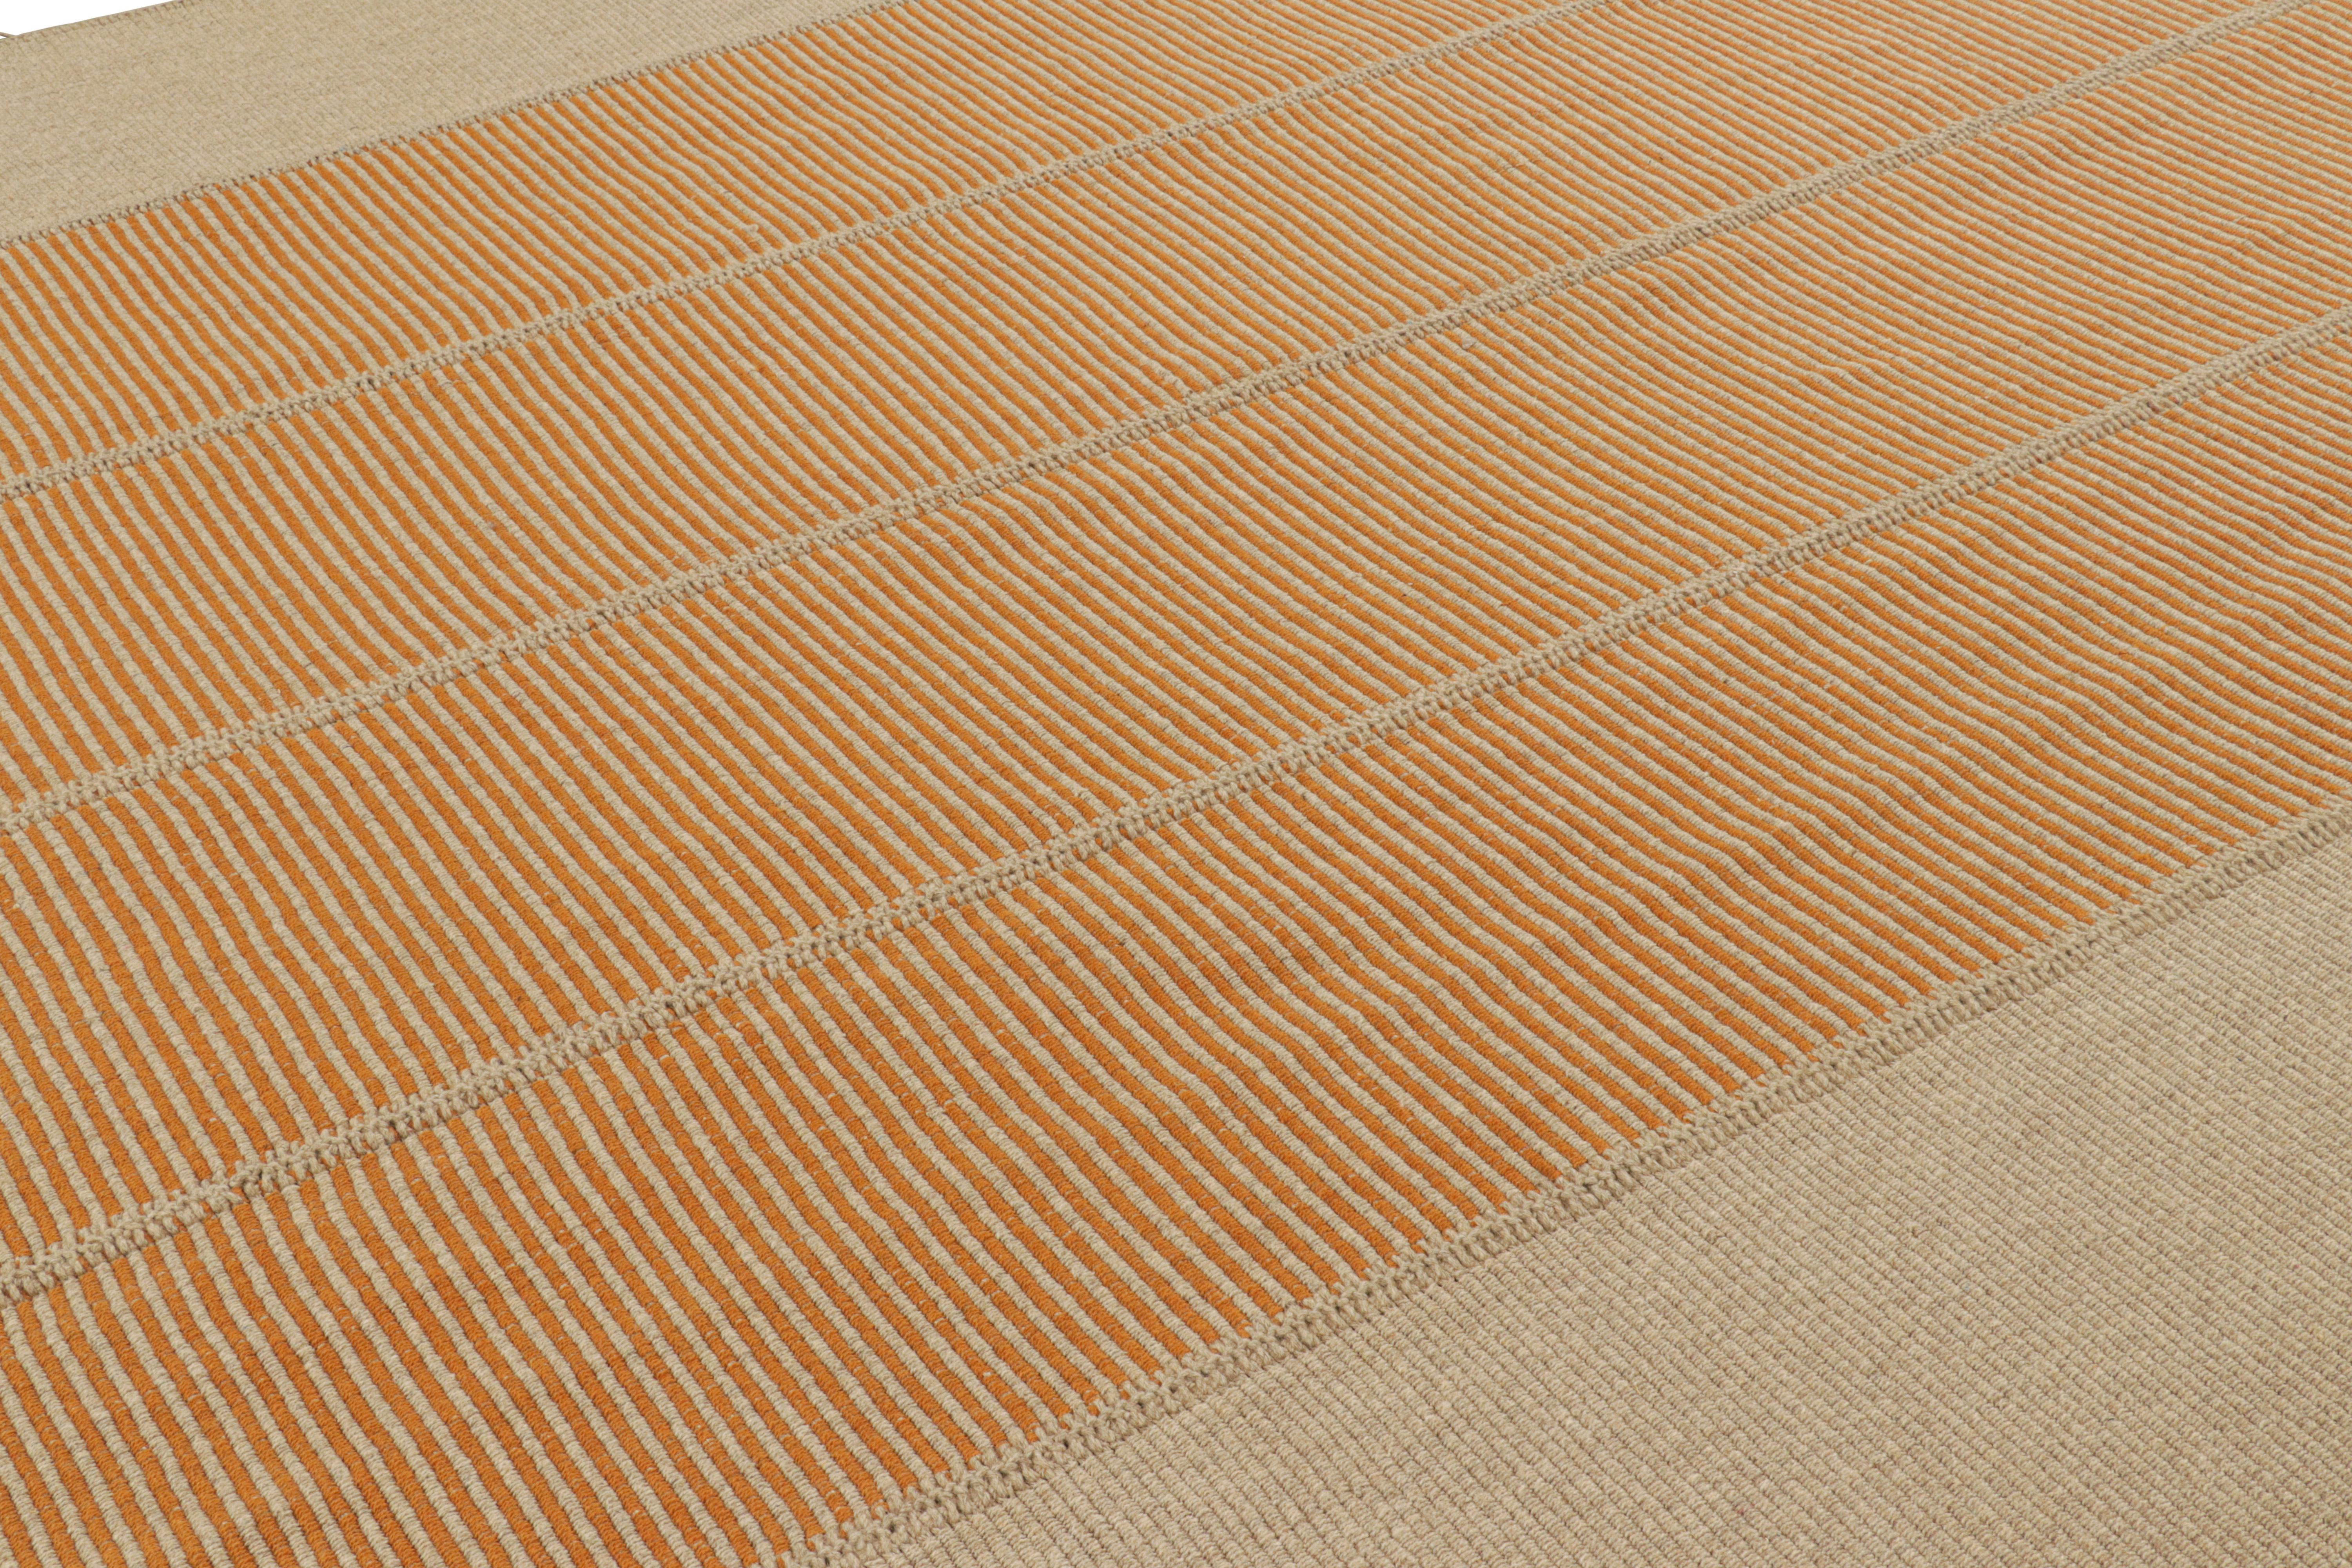 Handwoven in wool, a 10x14 Kilim design from an inventive new contemporary flat weave collection by Rug & Kilim.

On the Design: 

Fondly dubbed, “Rez Kilims”, this modern take on classic panel-weaving enjoys a fabulous, unique play of orange and